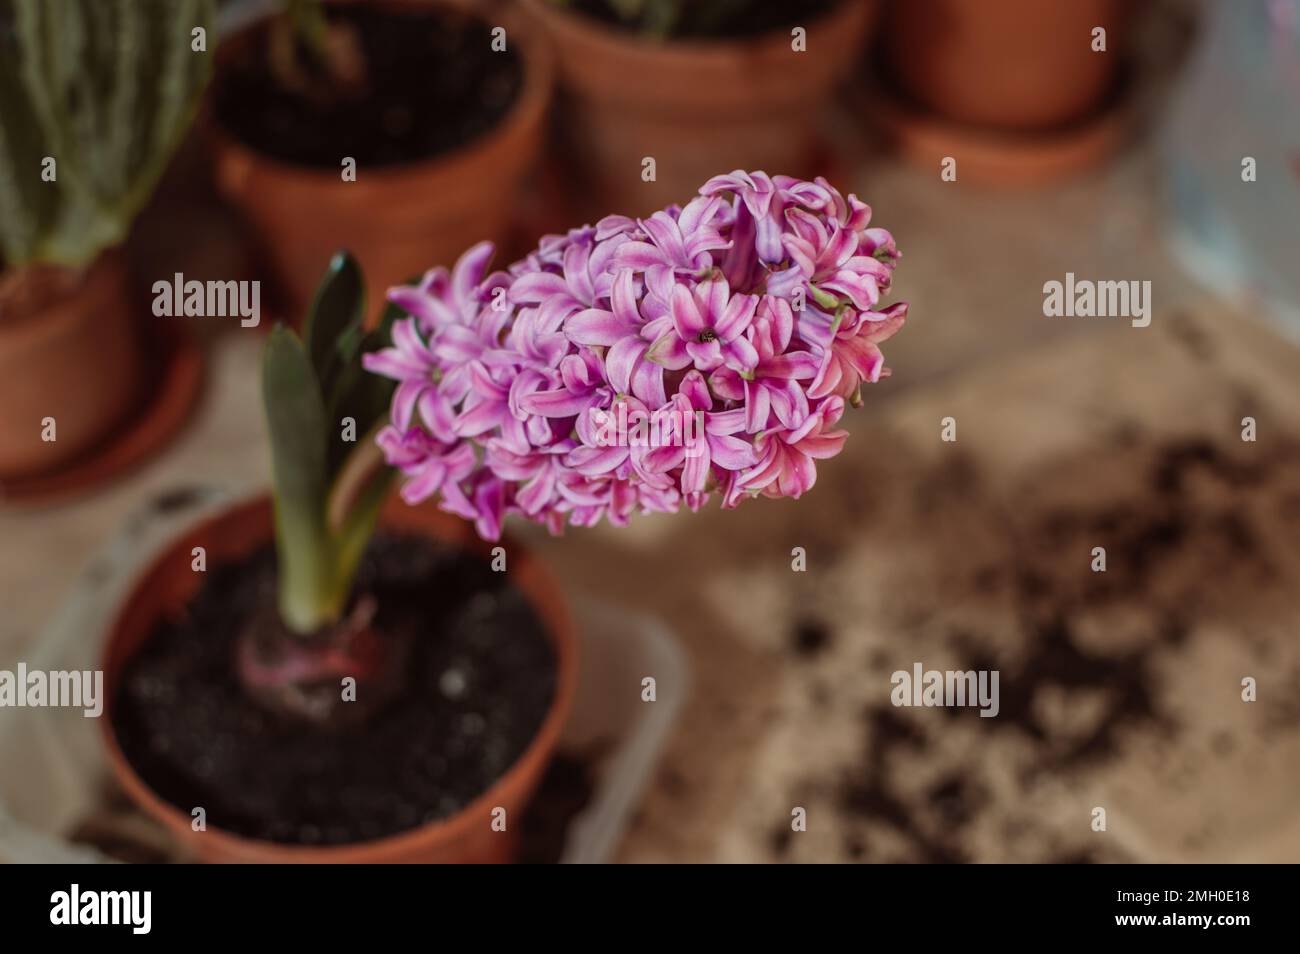 Bright pink purple large flower of hyacinth in clay pot Stock Photo